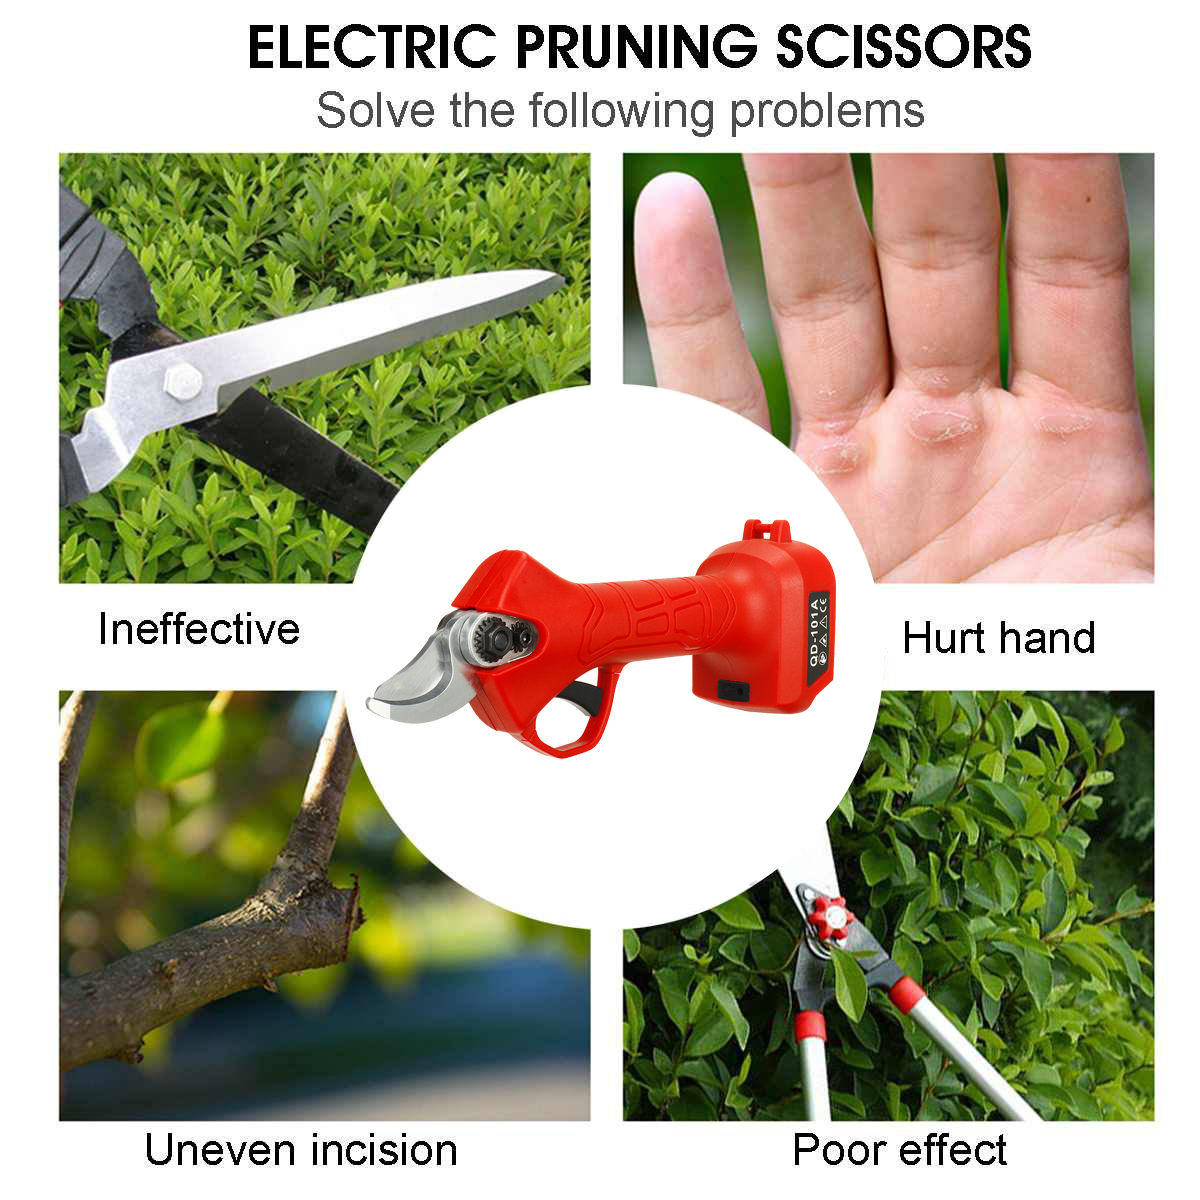 30mm-Cordless-Electric-Pruning-Shears-Liion-Battery-Leaves-Trimmer-Garden-Power-Tool-Fit-Makita-1885465-5